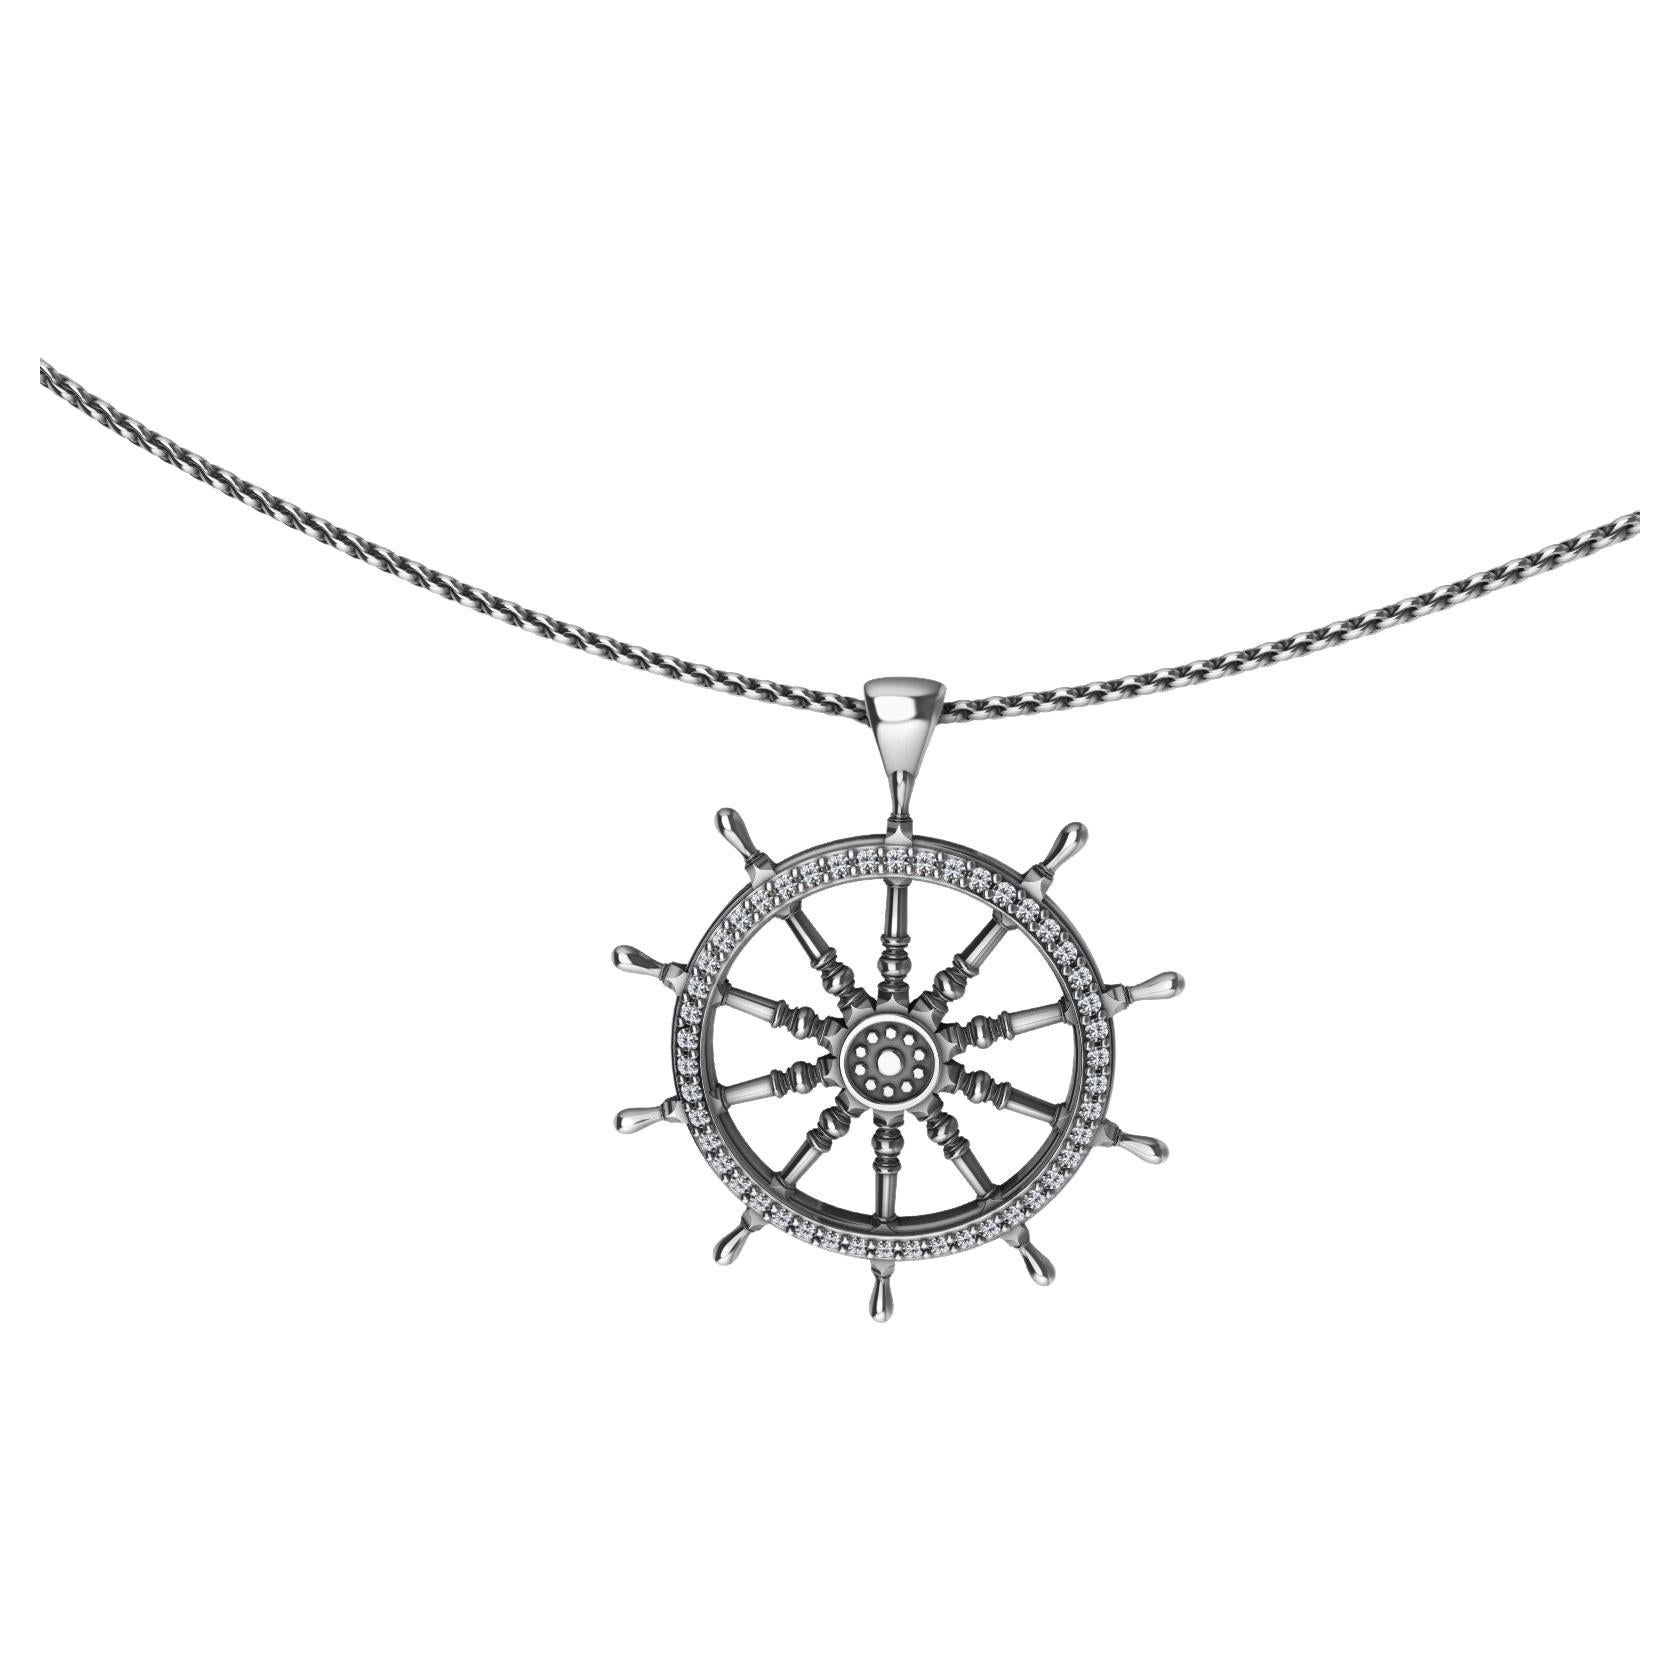  Sterling Diamond Captain Sailors Wheel Pendant, For you water and wind lovers. Tiffany Designer , Thomas Kurilla has not forgotten you mates. Inspired from antique wooden ship wheels. A lover of sailing as well.
46-G, SI 1  diamonds 18 inch cable